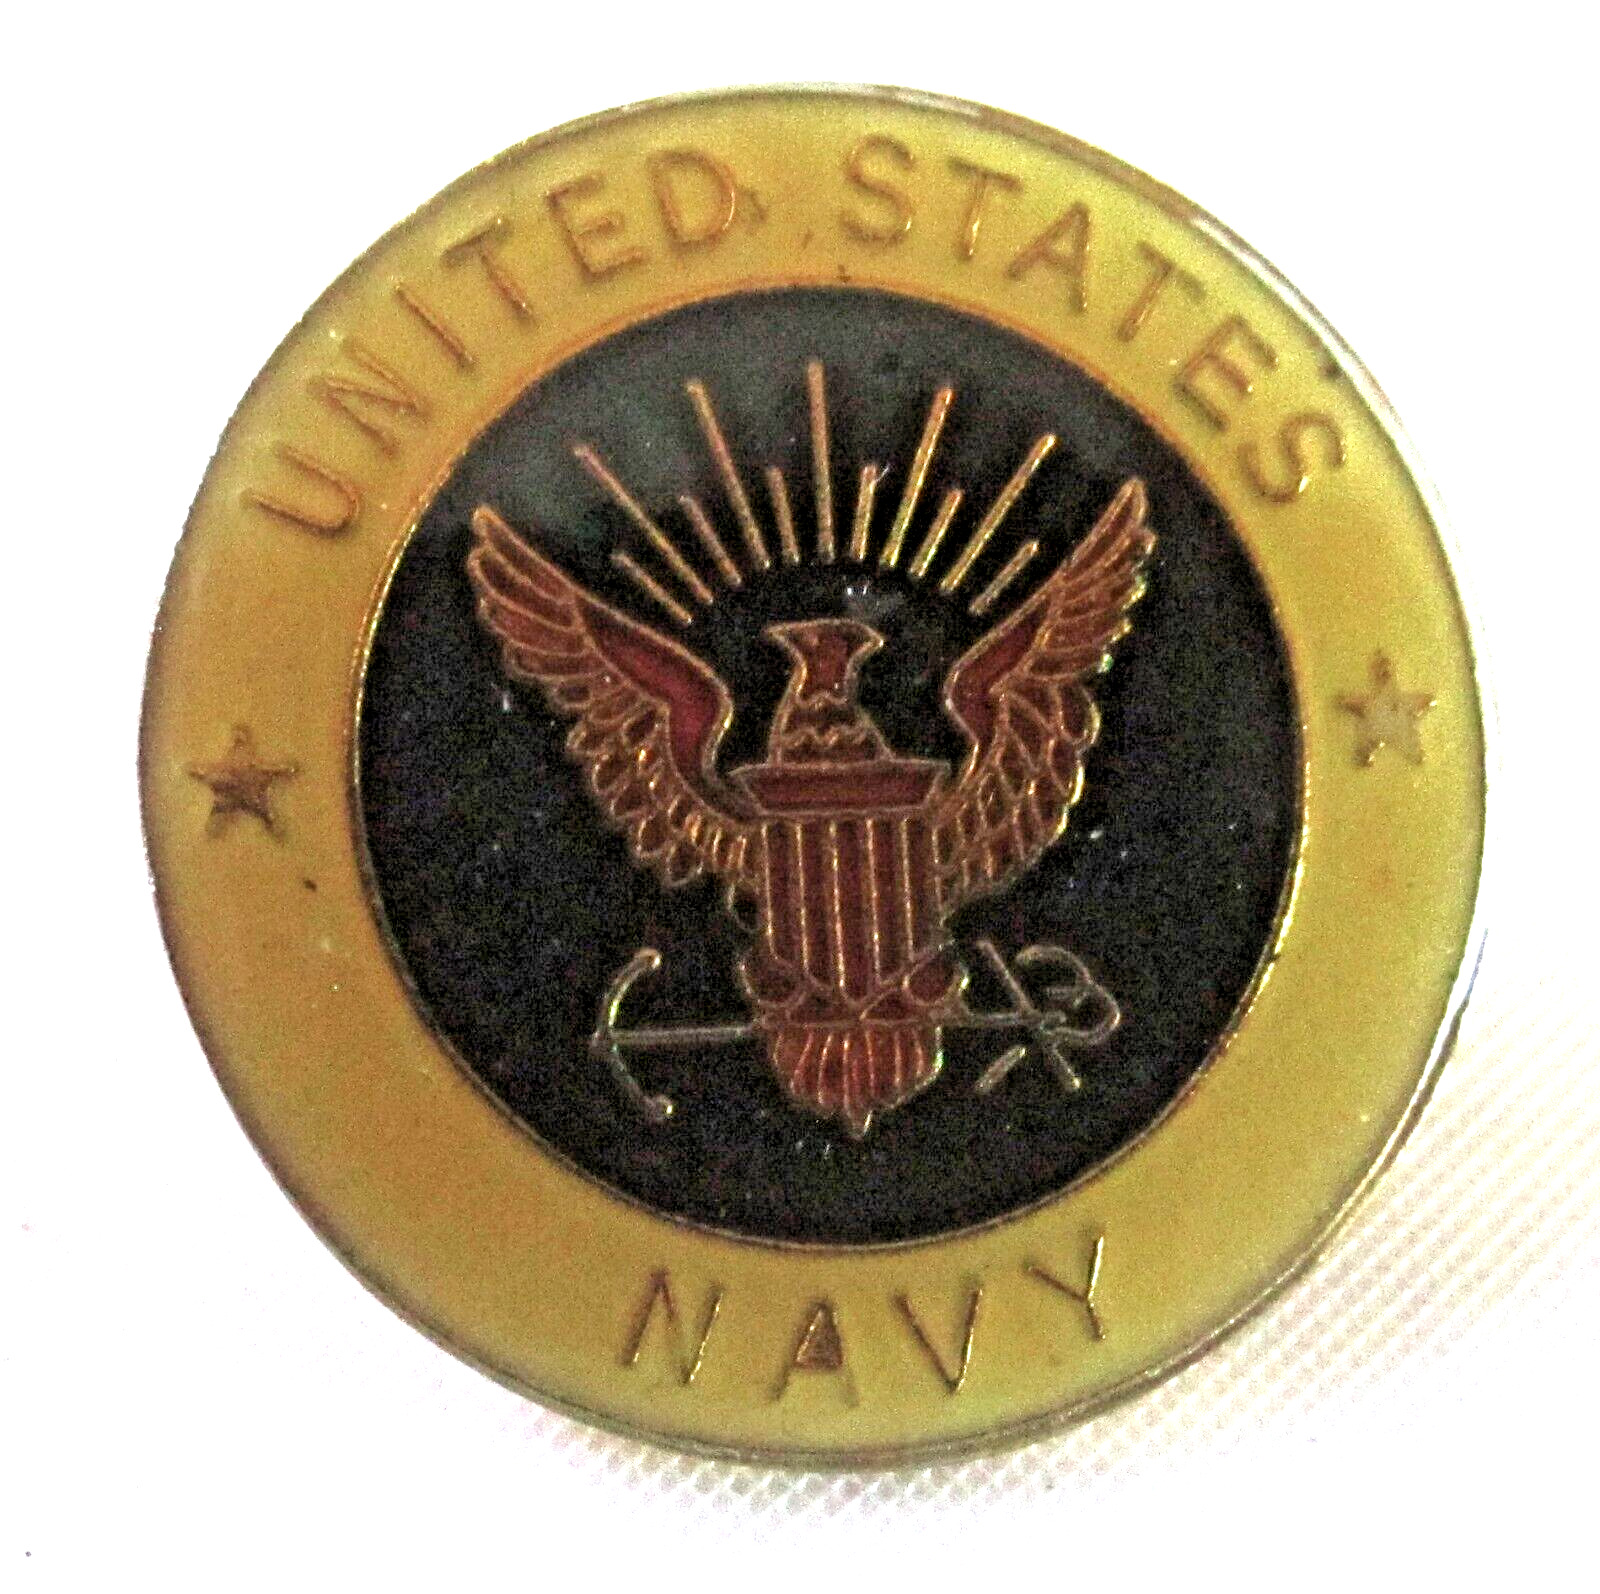 UNITED STATES NAVY - Vintage 1 Inch Round Lapel Pin